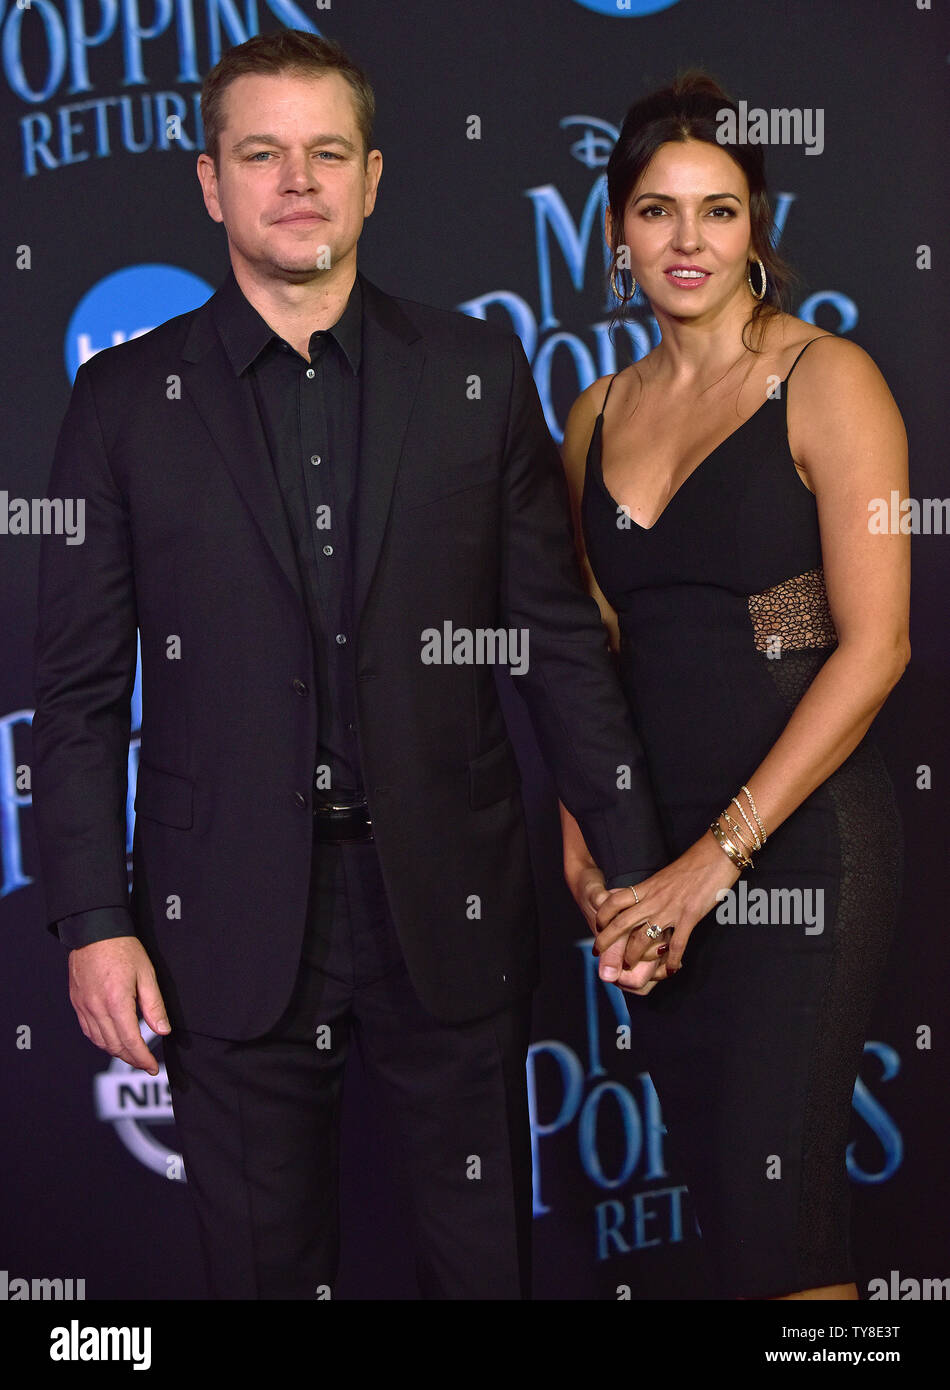 Matt Damon (L) and his wife Luciana Barroso attend the world premiere of 'Mary Poppins Returns' at the Dolby Theatre in Los Angeles, California on November 29, 2018. Photo by Chris Chew/UPI Stock Photo